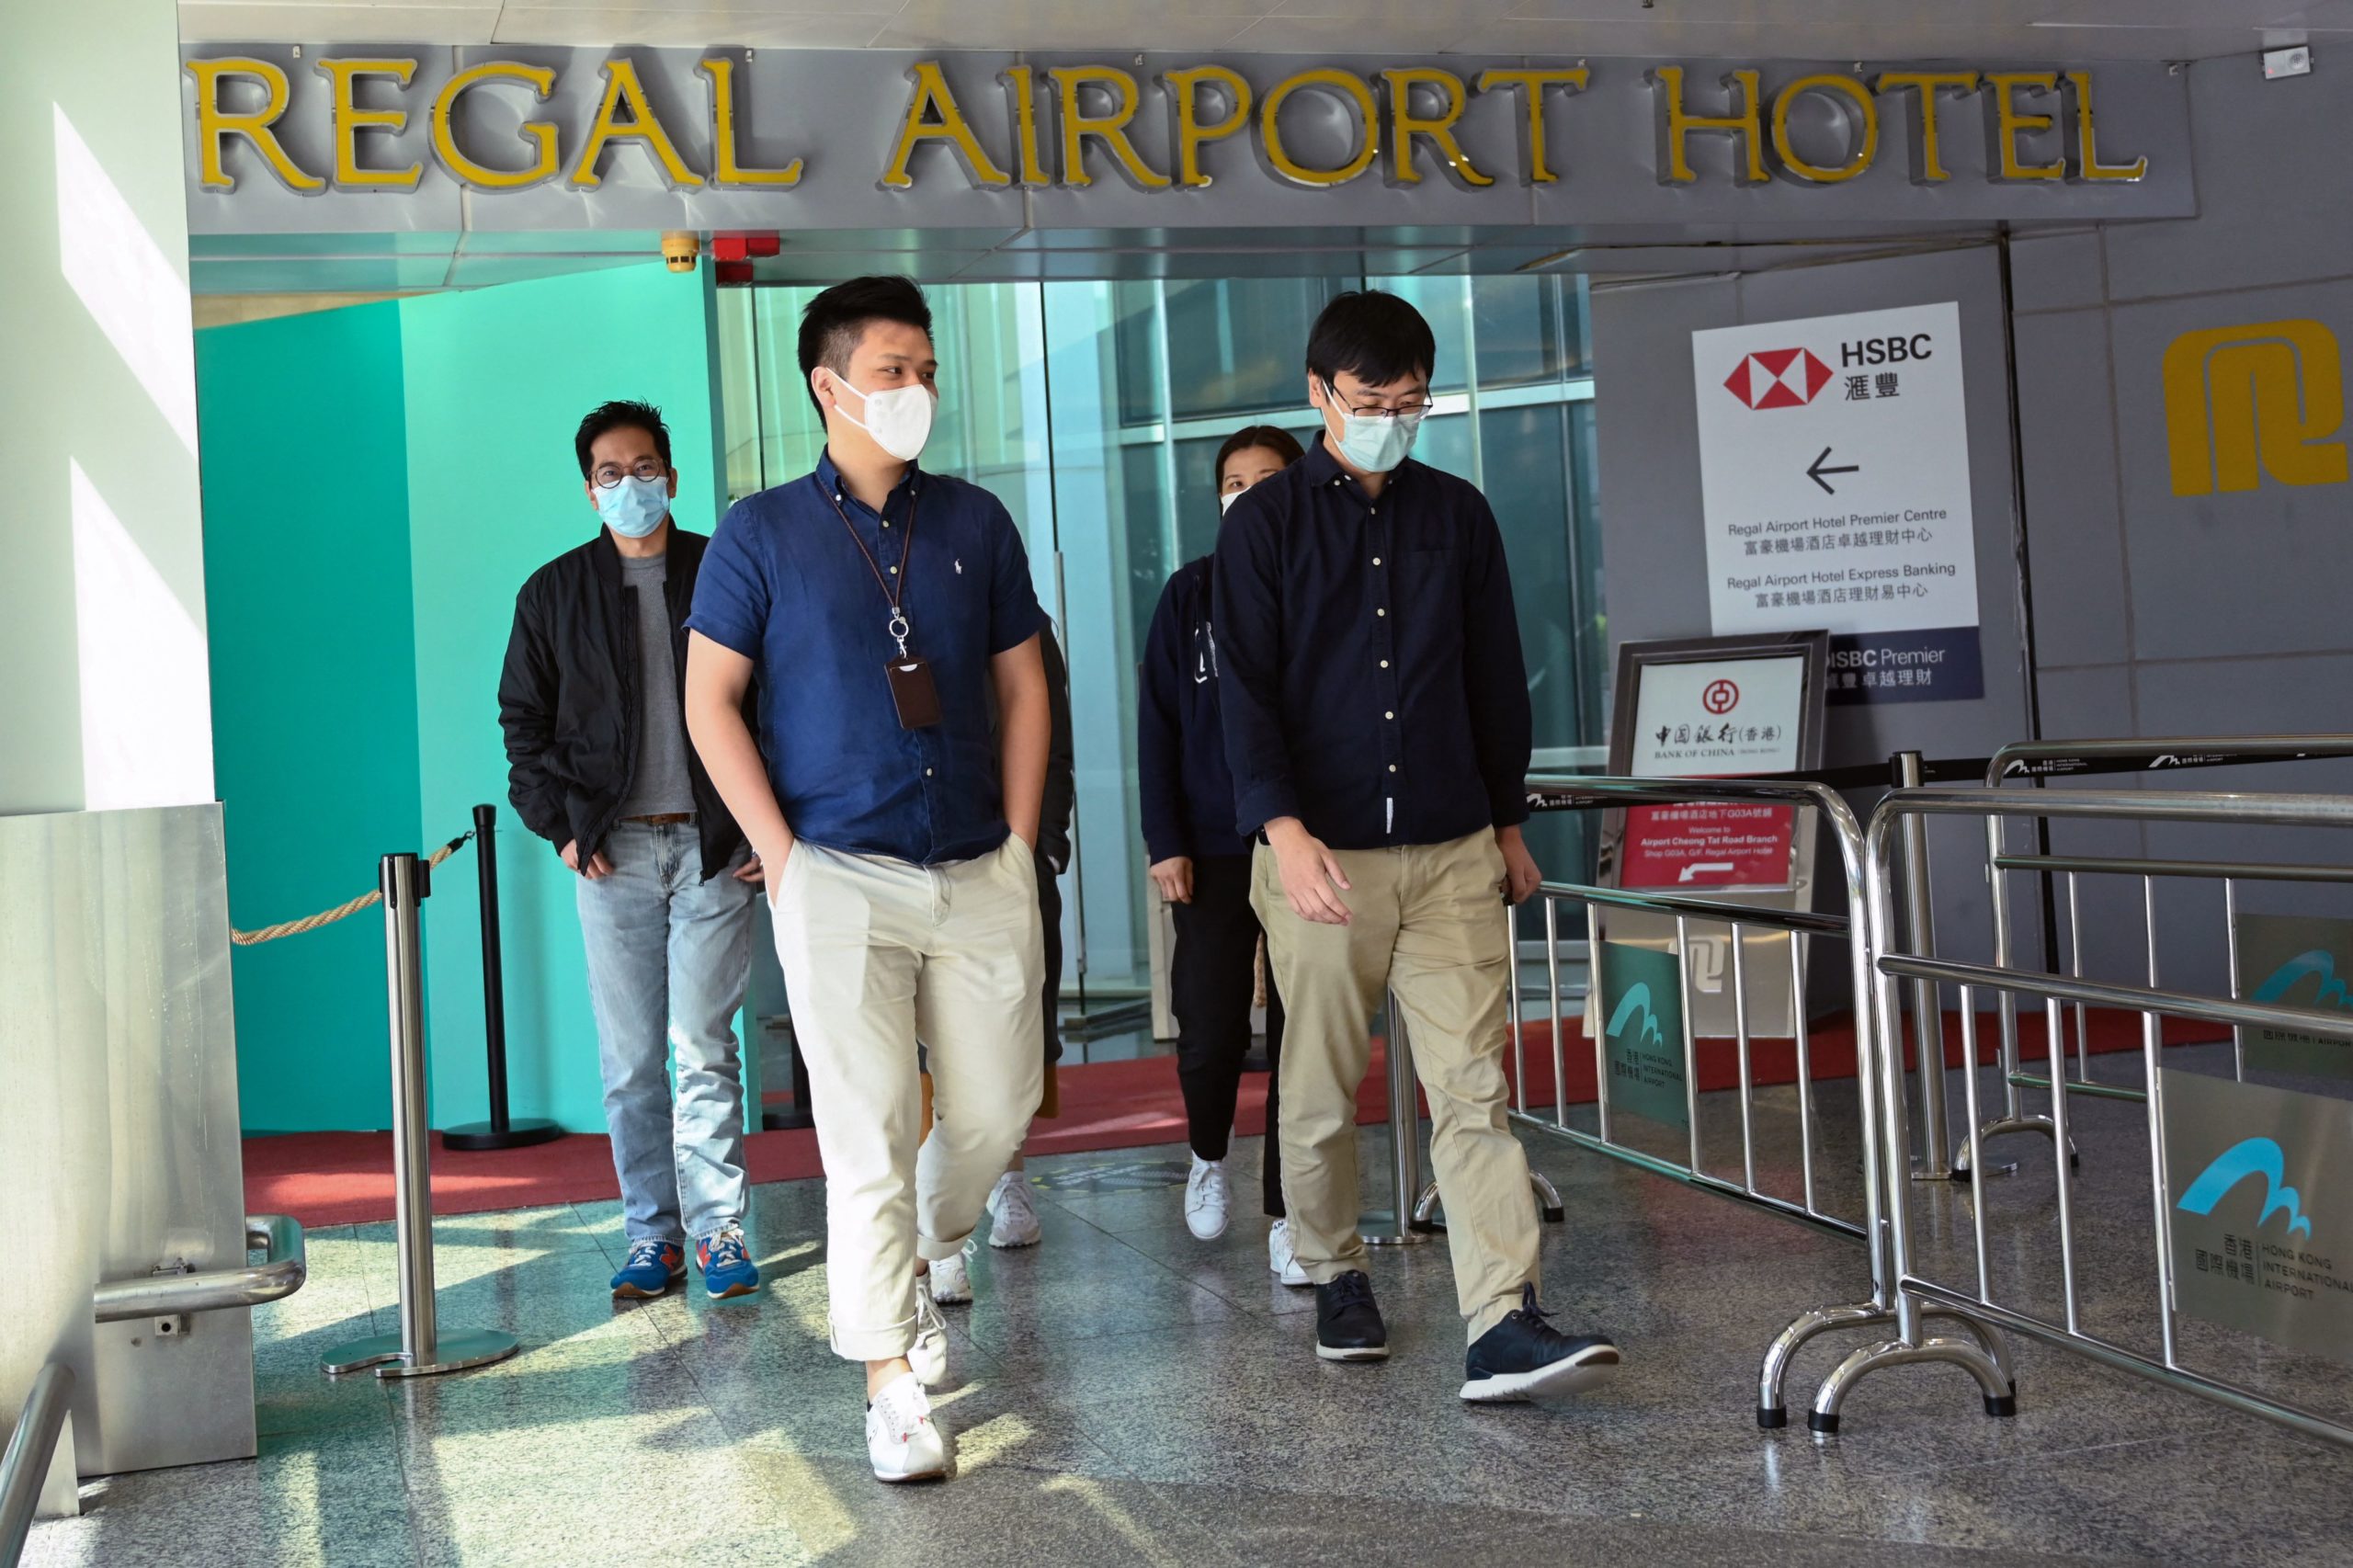 People leave the Regal Airport Hotel at Chek Lap Kok airport in Hong Kong on November 26, 2021, where a new Covid-19 variant deemed a 'major threat' was detected in a traveller from South Africa and who has since passed it on to a local man whilst in quarantine. (Photo by Peter PARKS / AFP) (Photo by PETER PARKS/AFP via Getty Images)